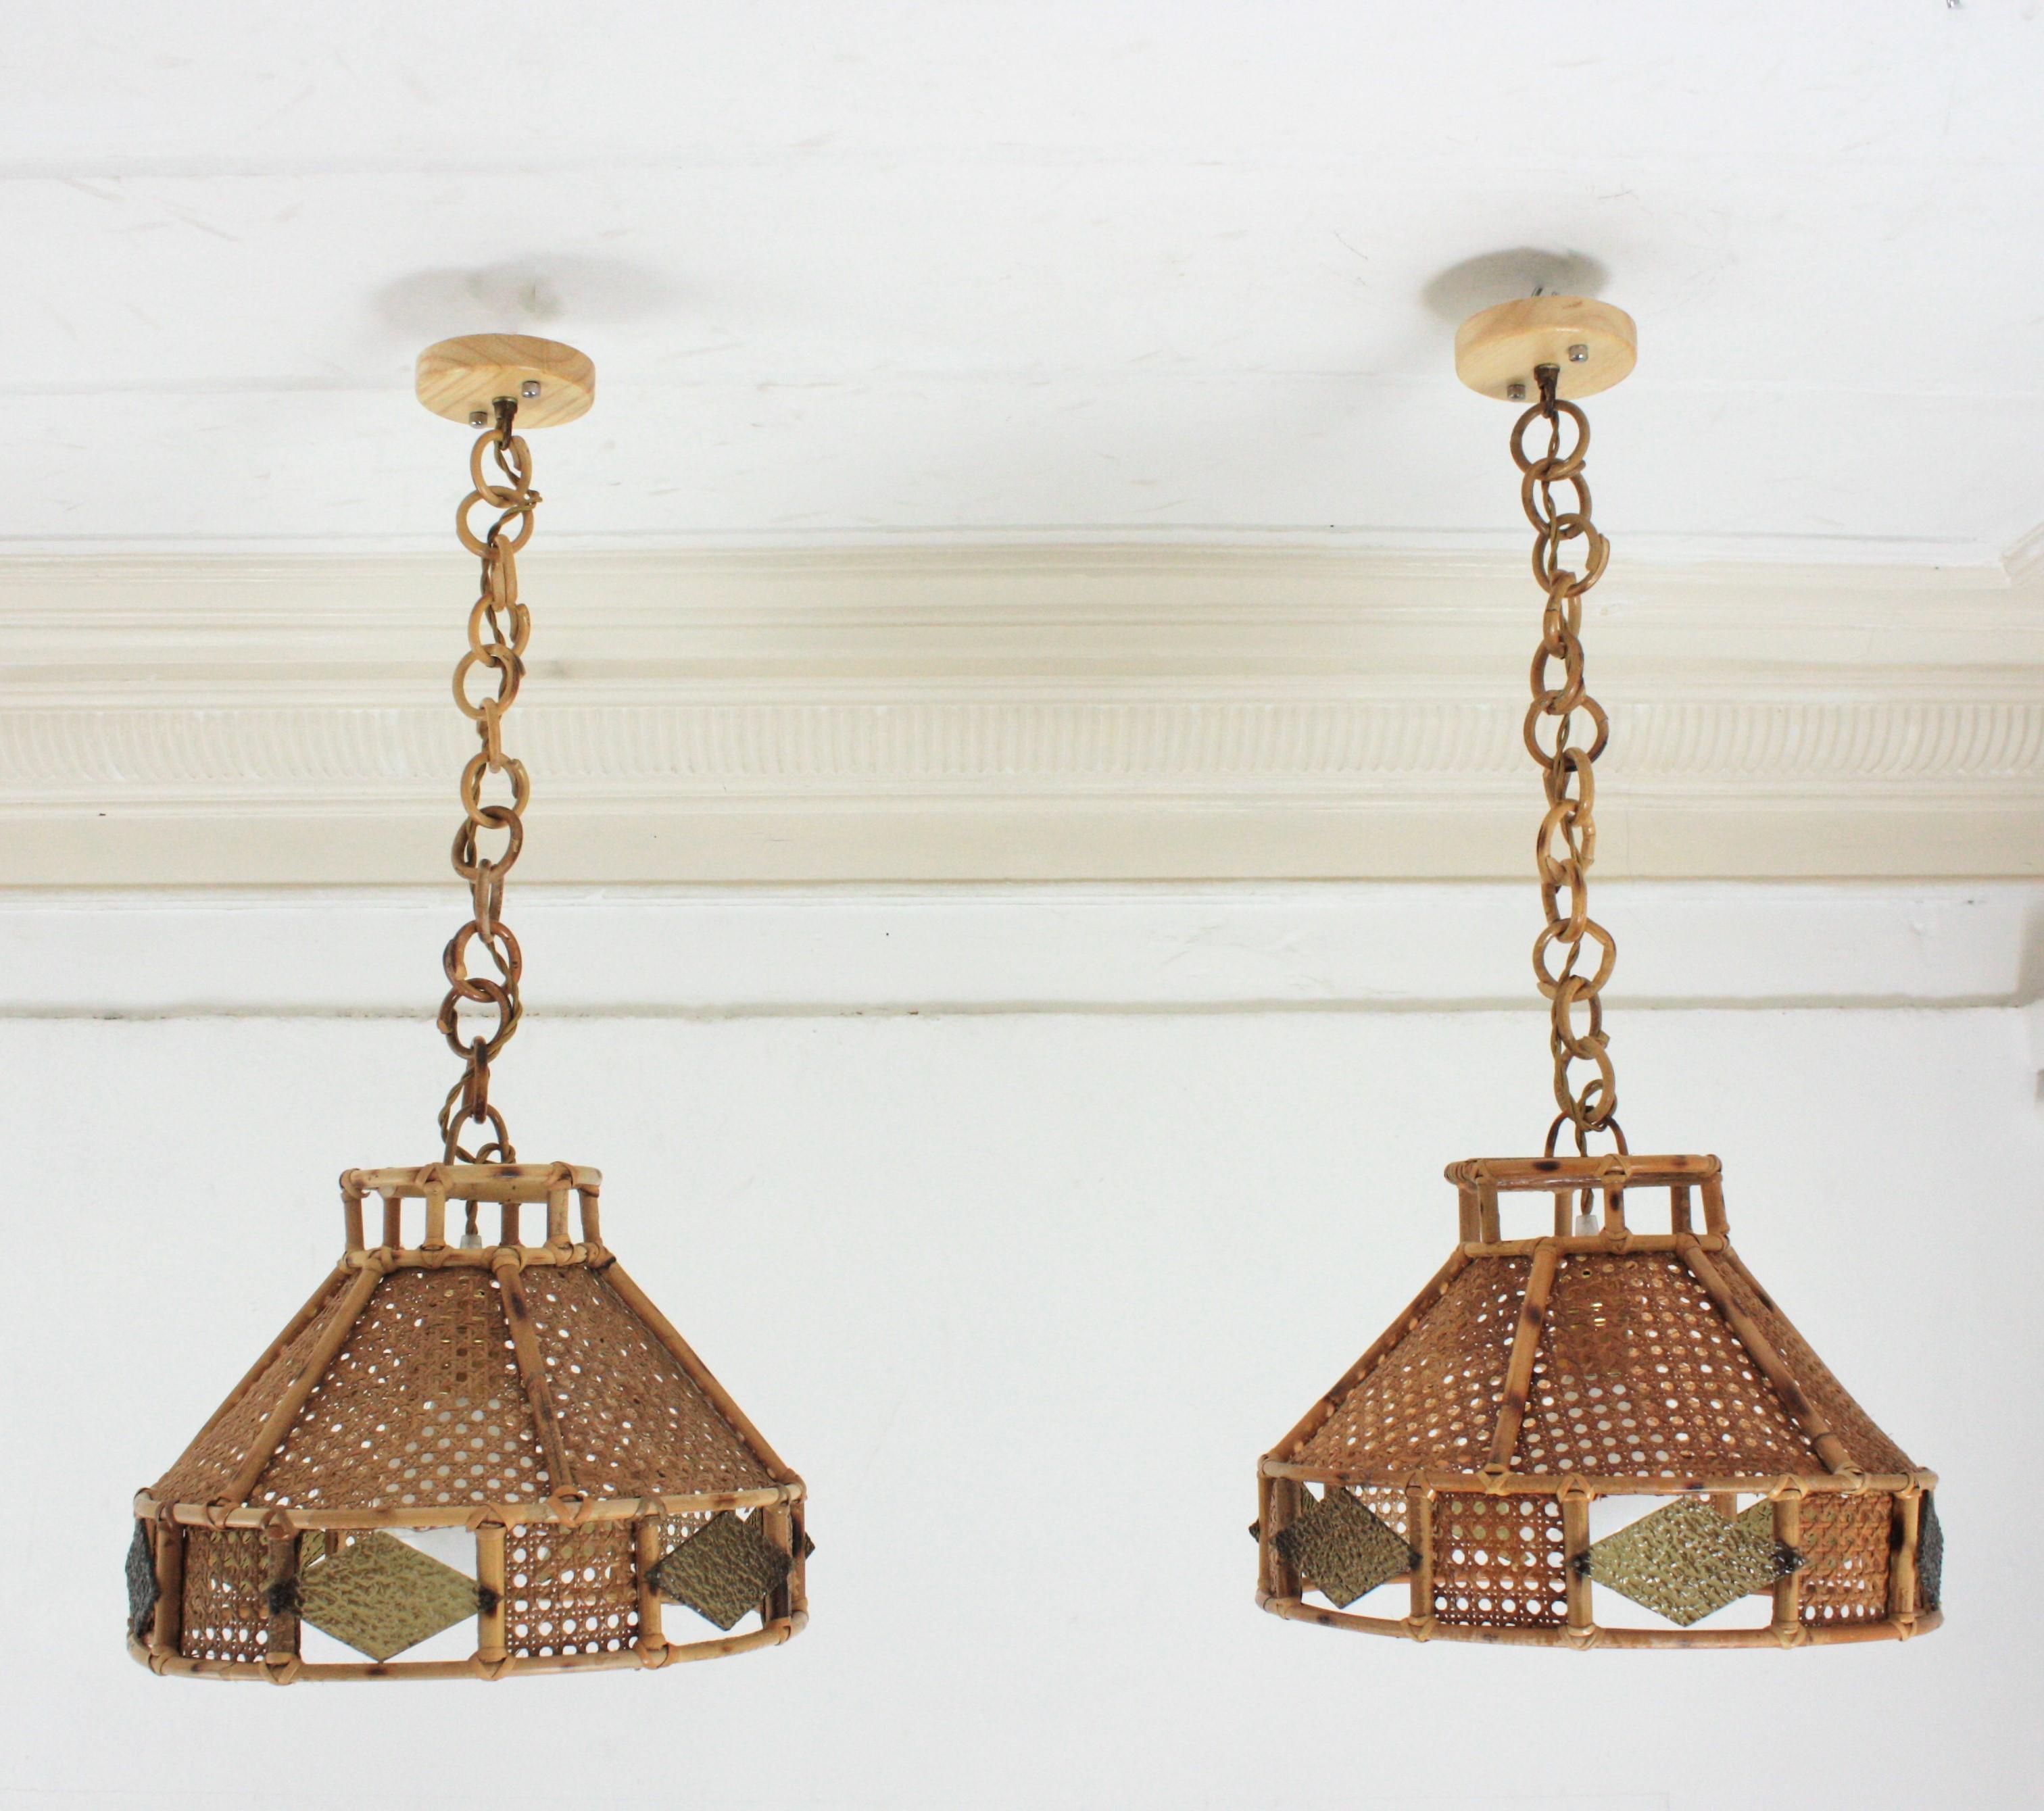 Italian Modern Wicker Wire Rattan Pendant Hanging Lights with Glass Accent, Pair For Sale 10